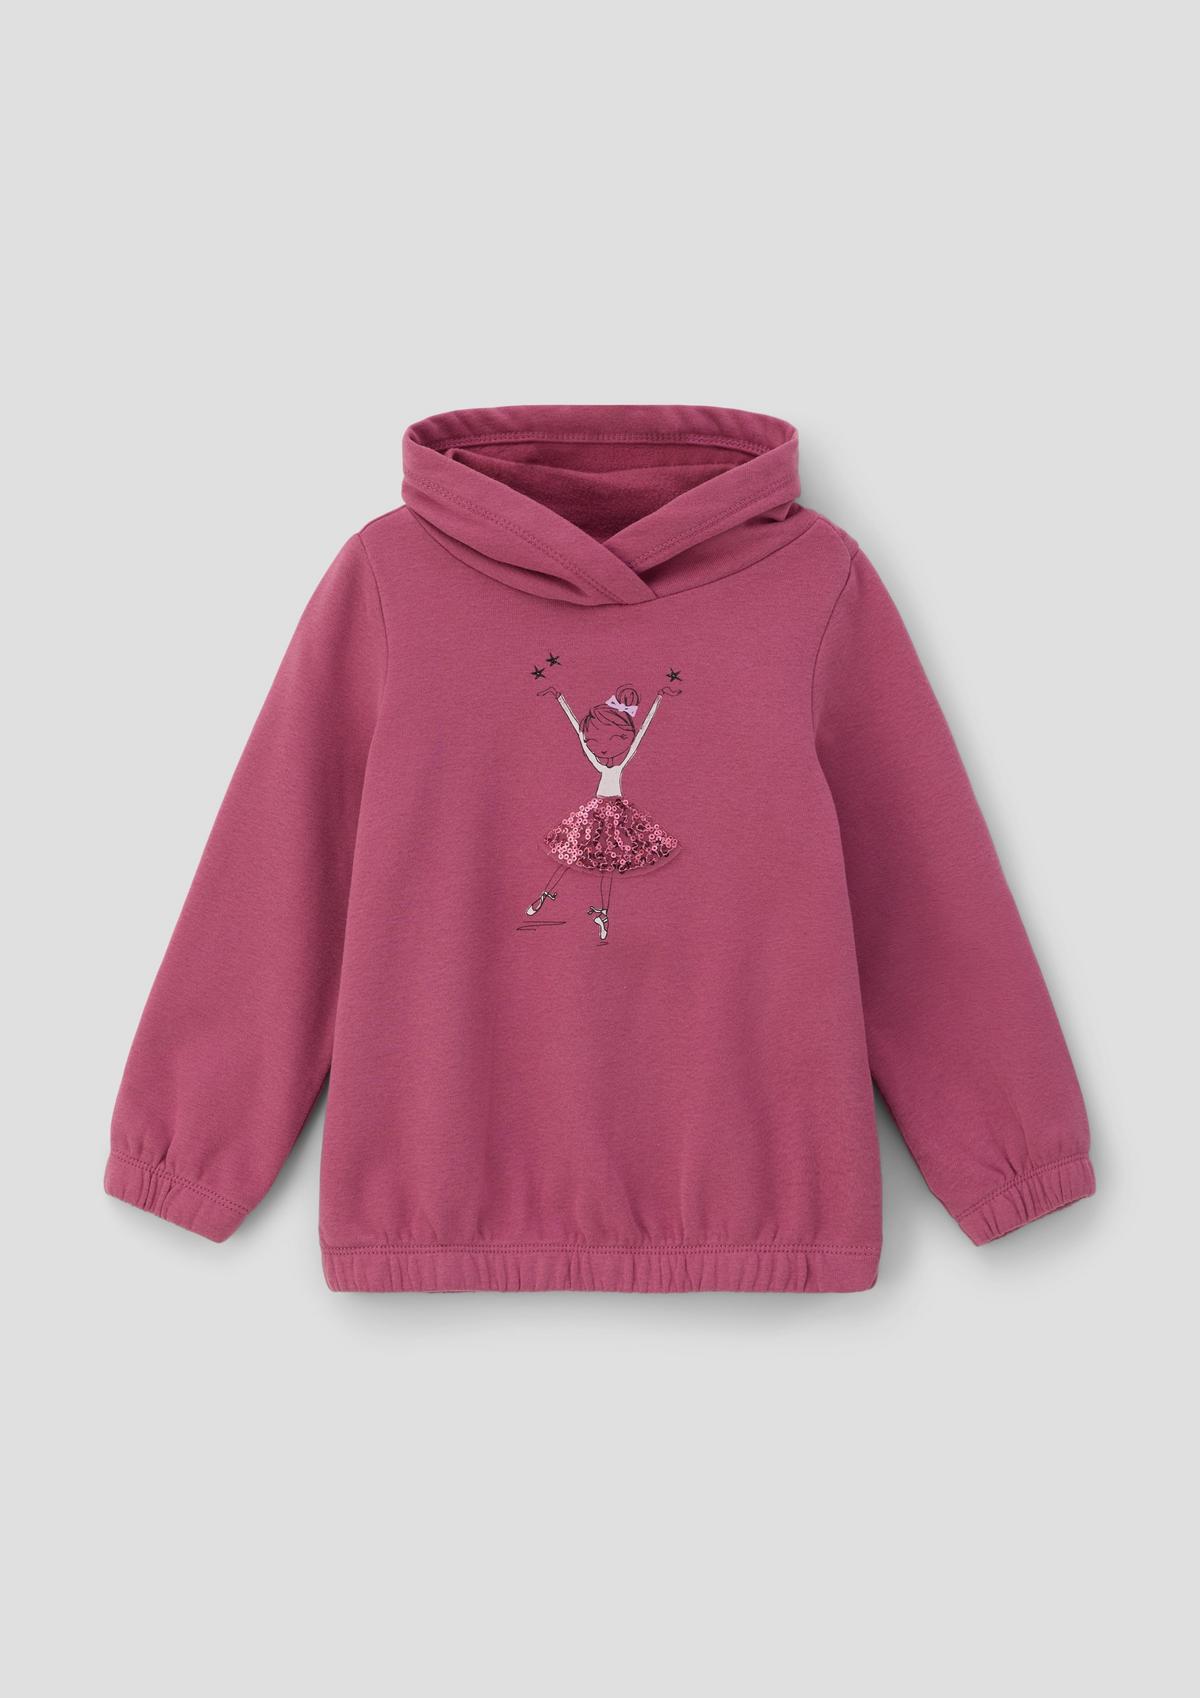 Sweatshirts and girls knitwear teens and for